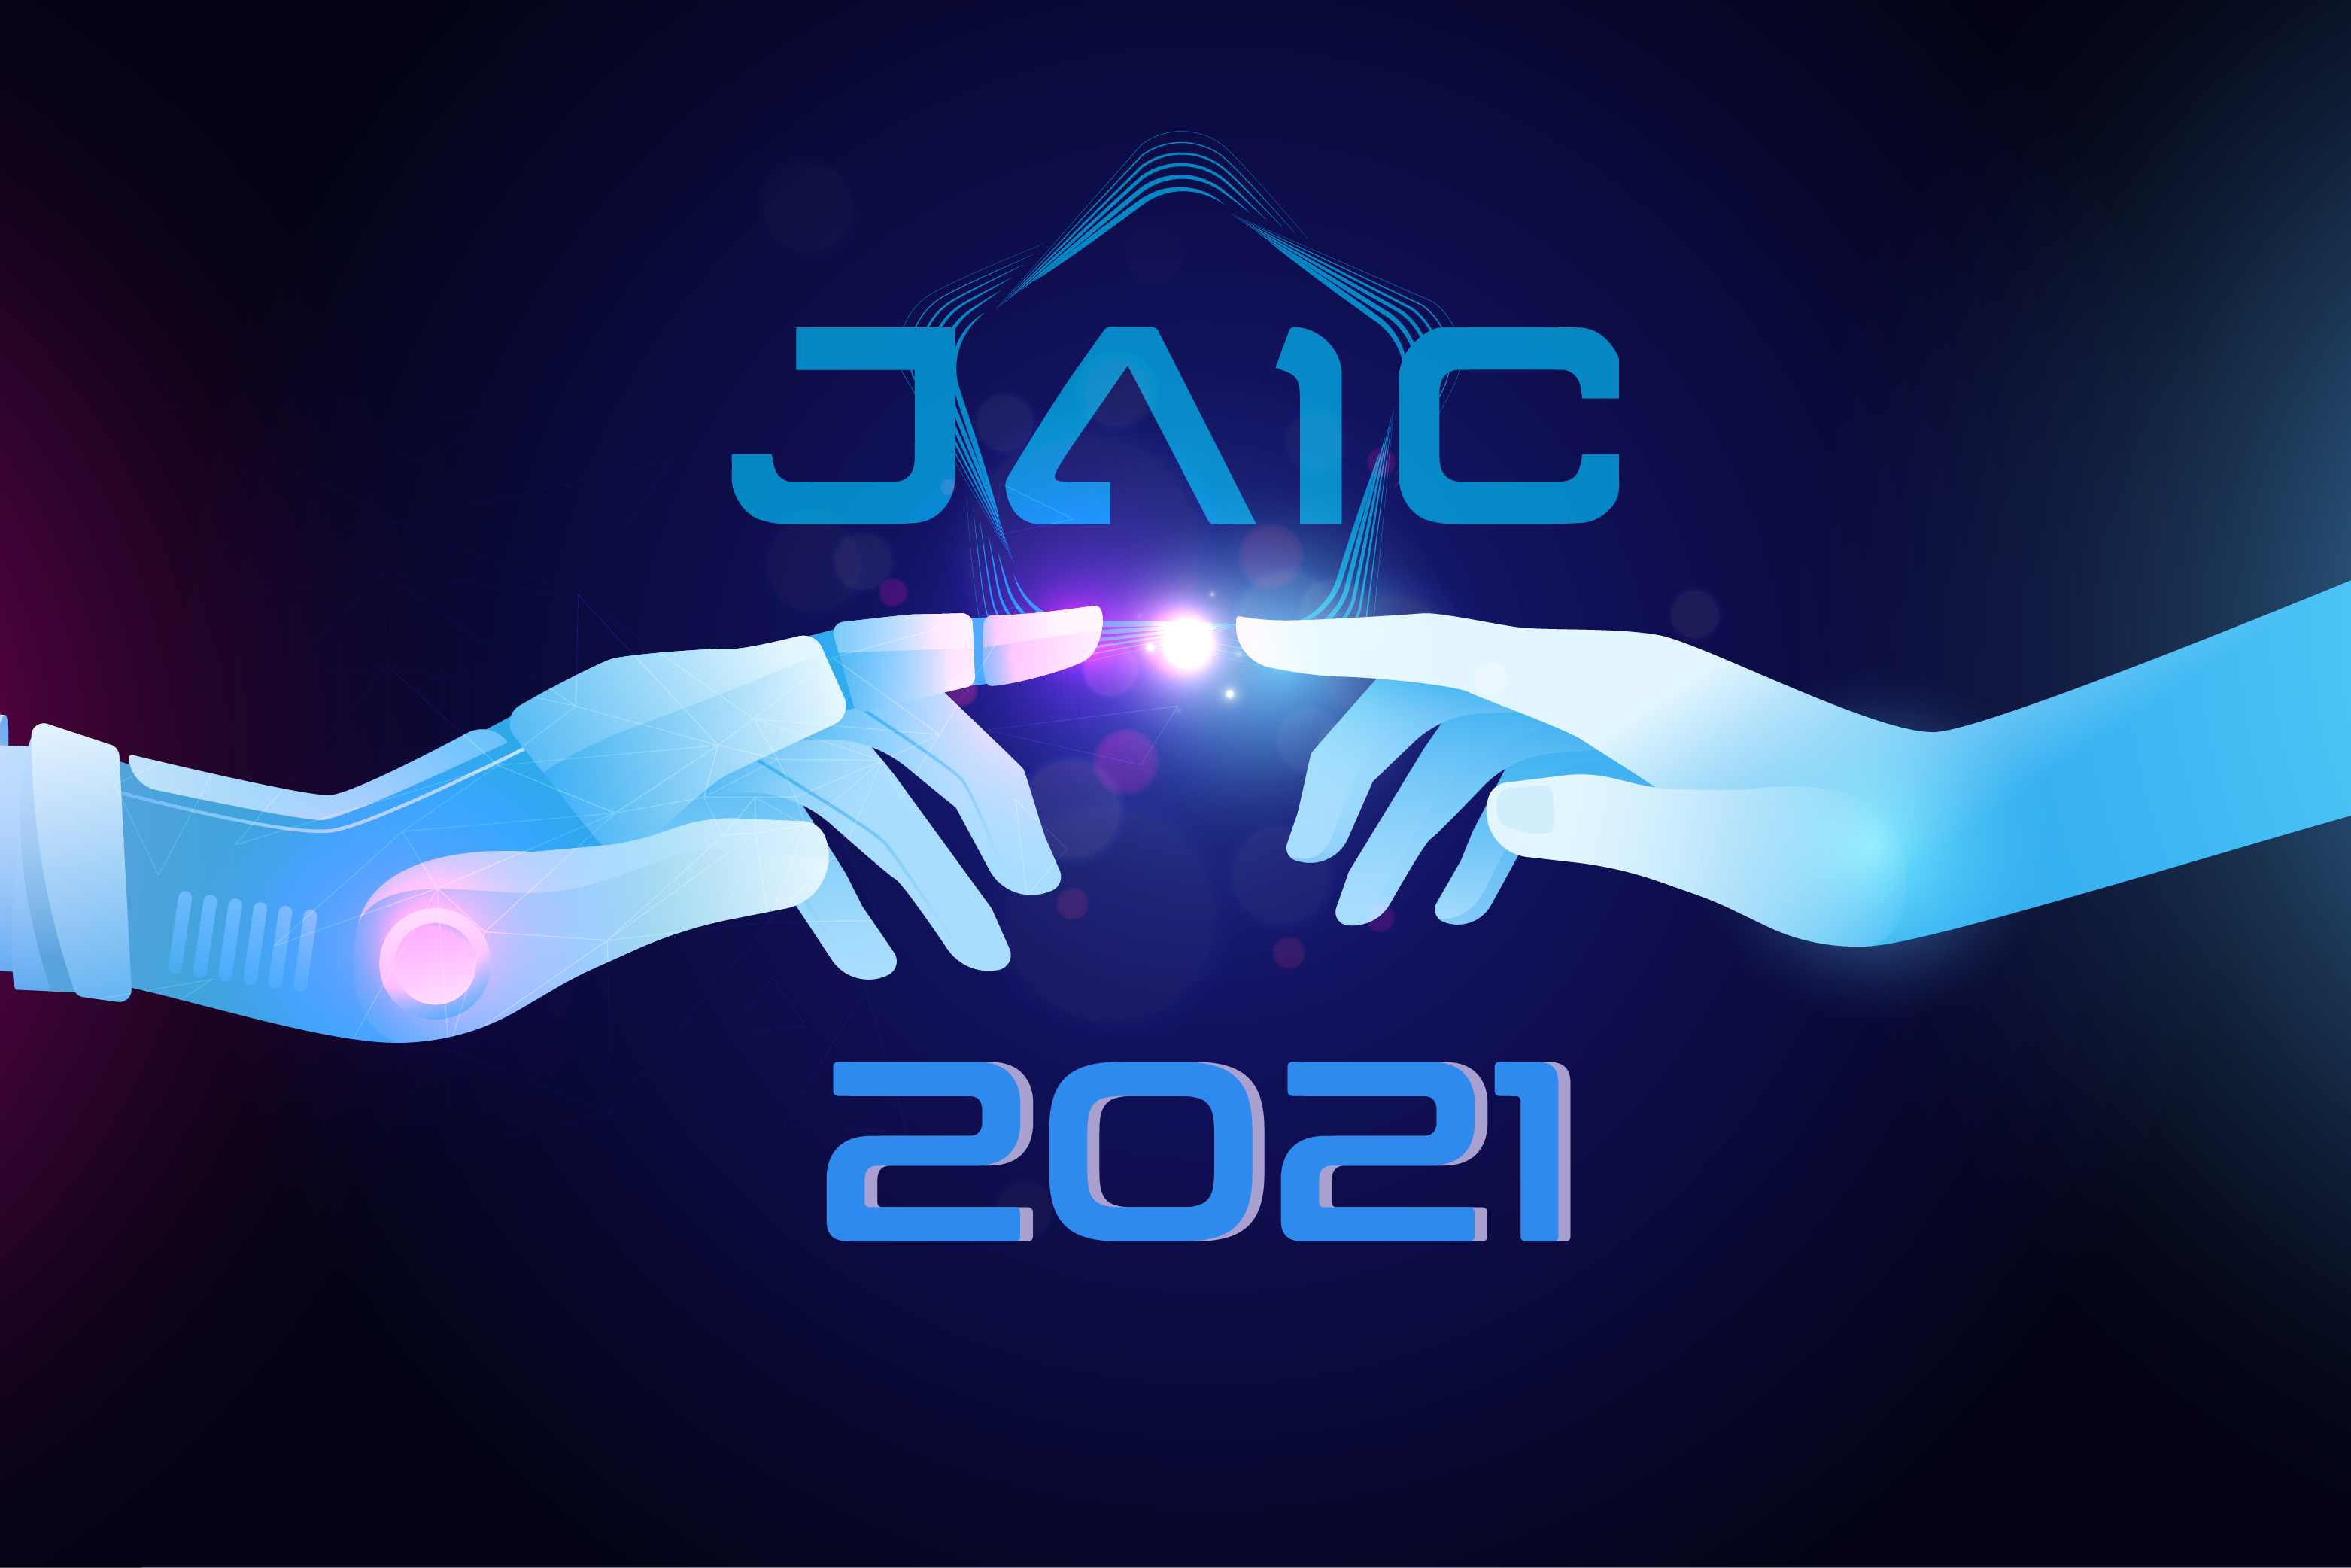 The JAIC in 2021 – Building an AI Future by focusing on AI in the Present